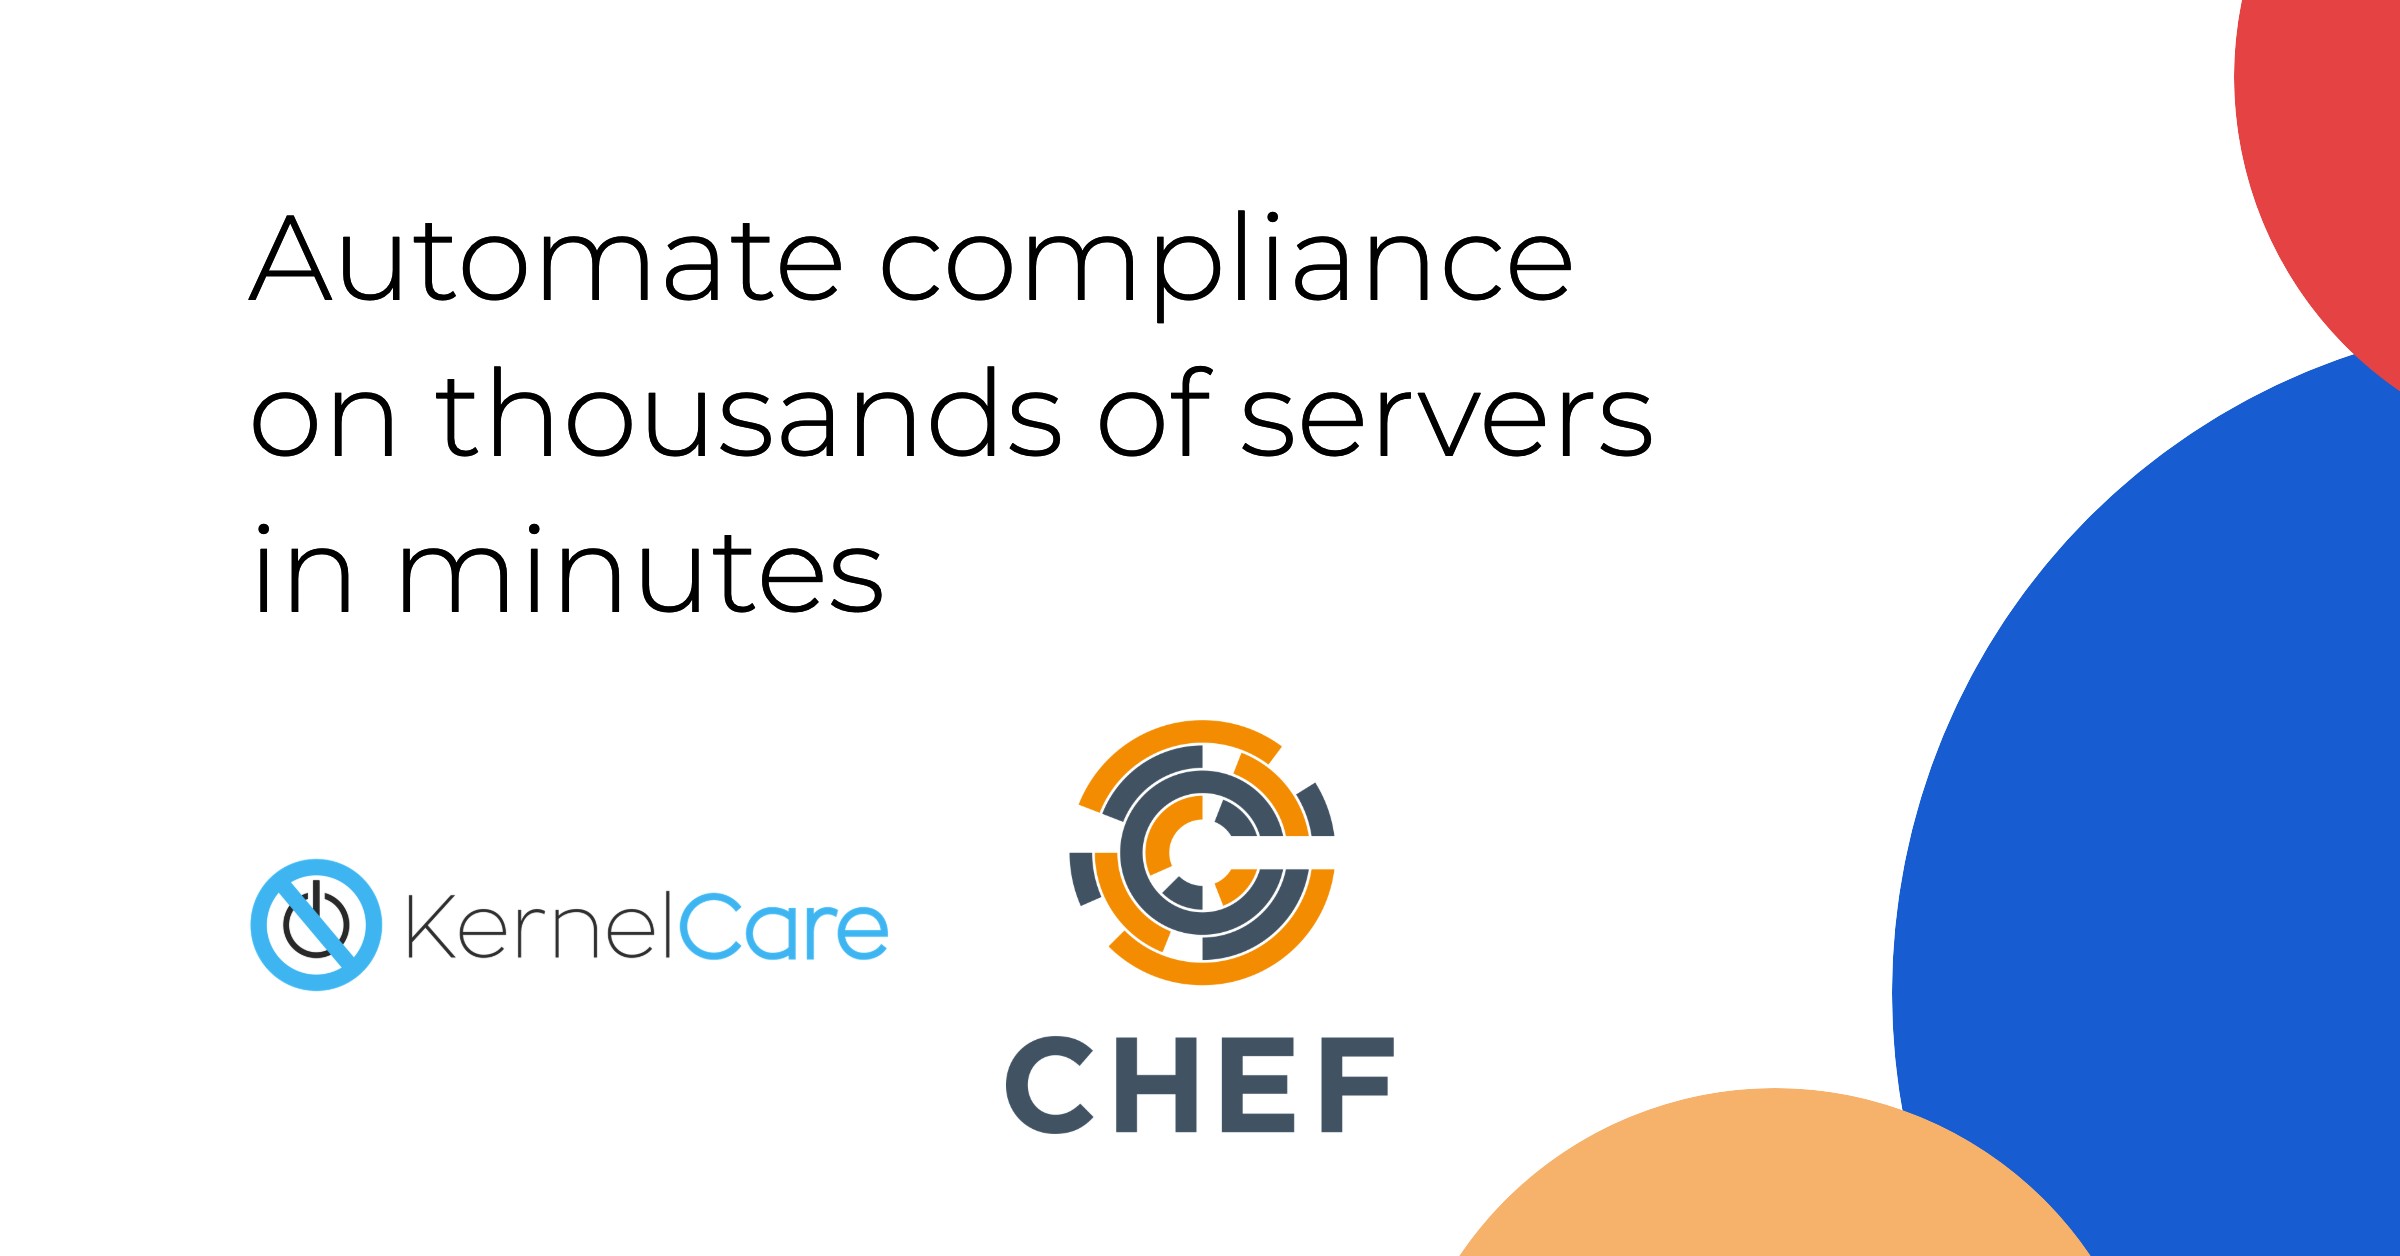 KernelCare and chef announcement (1)